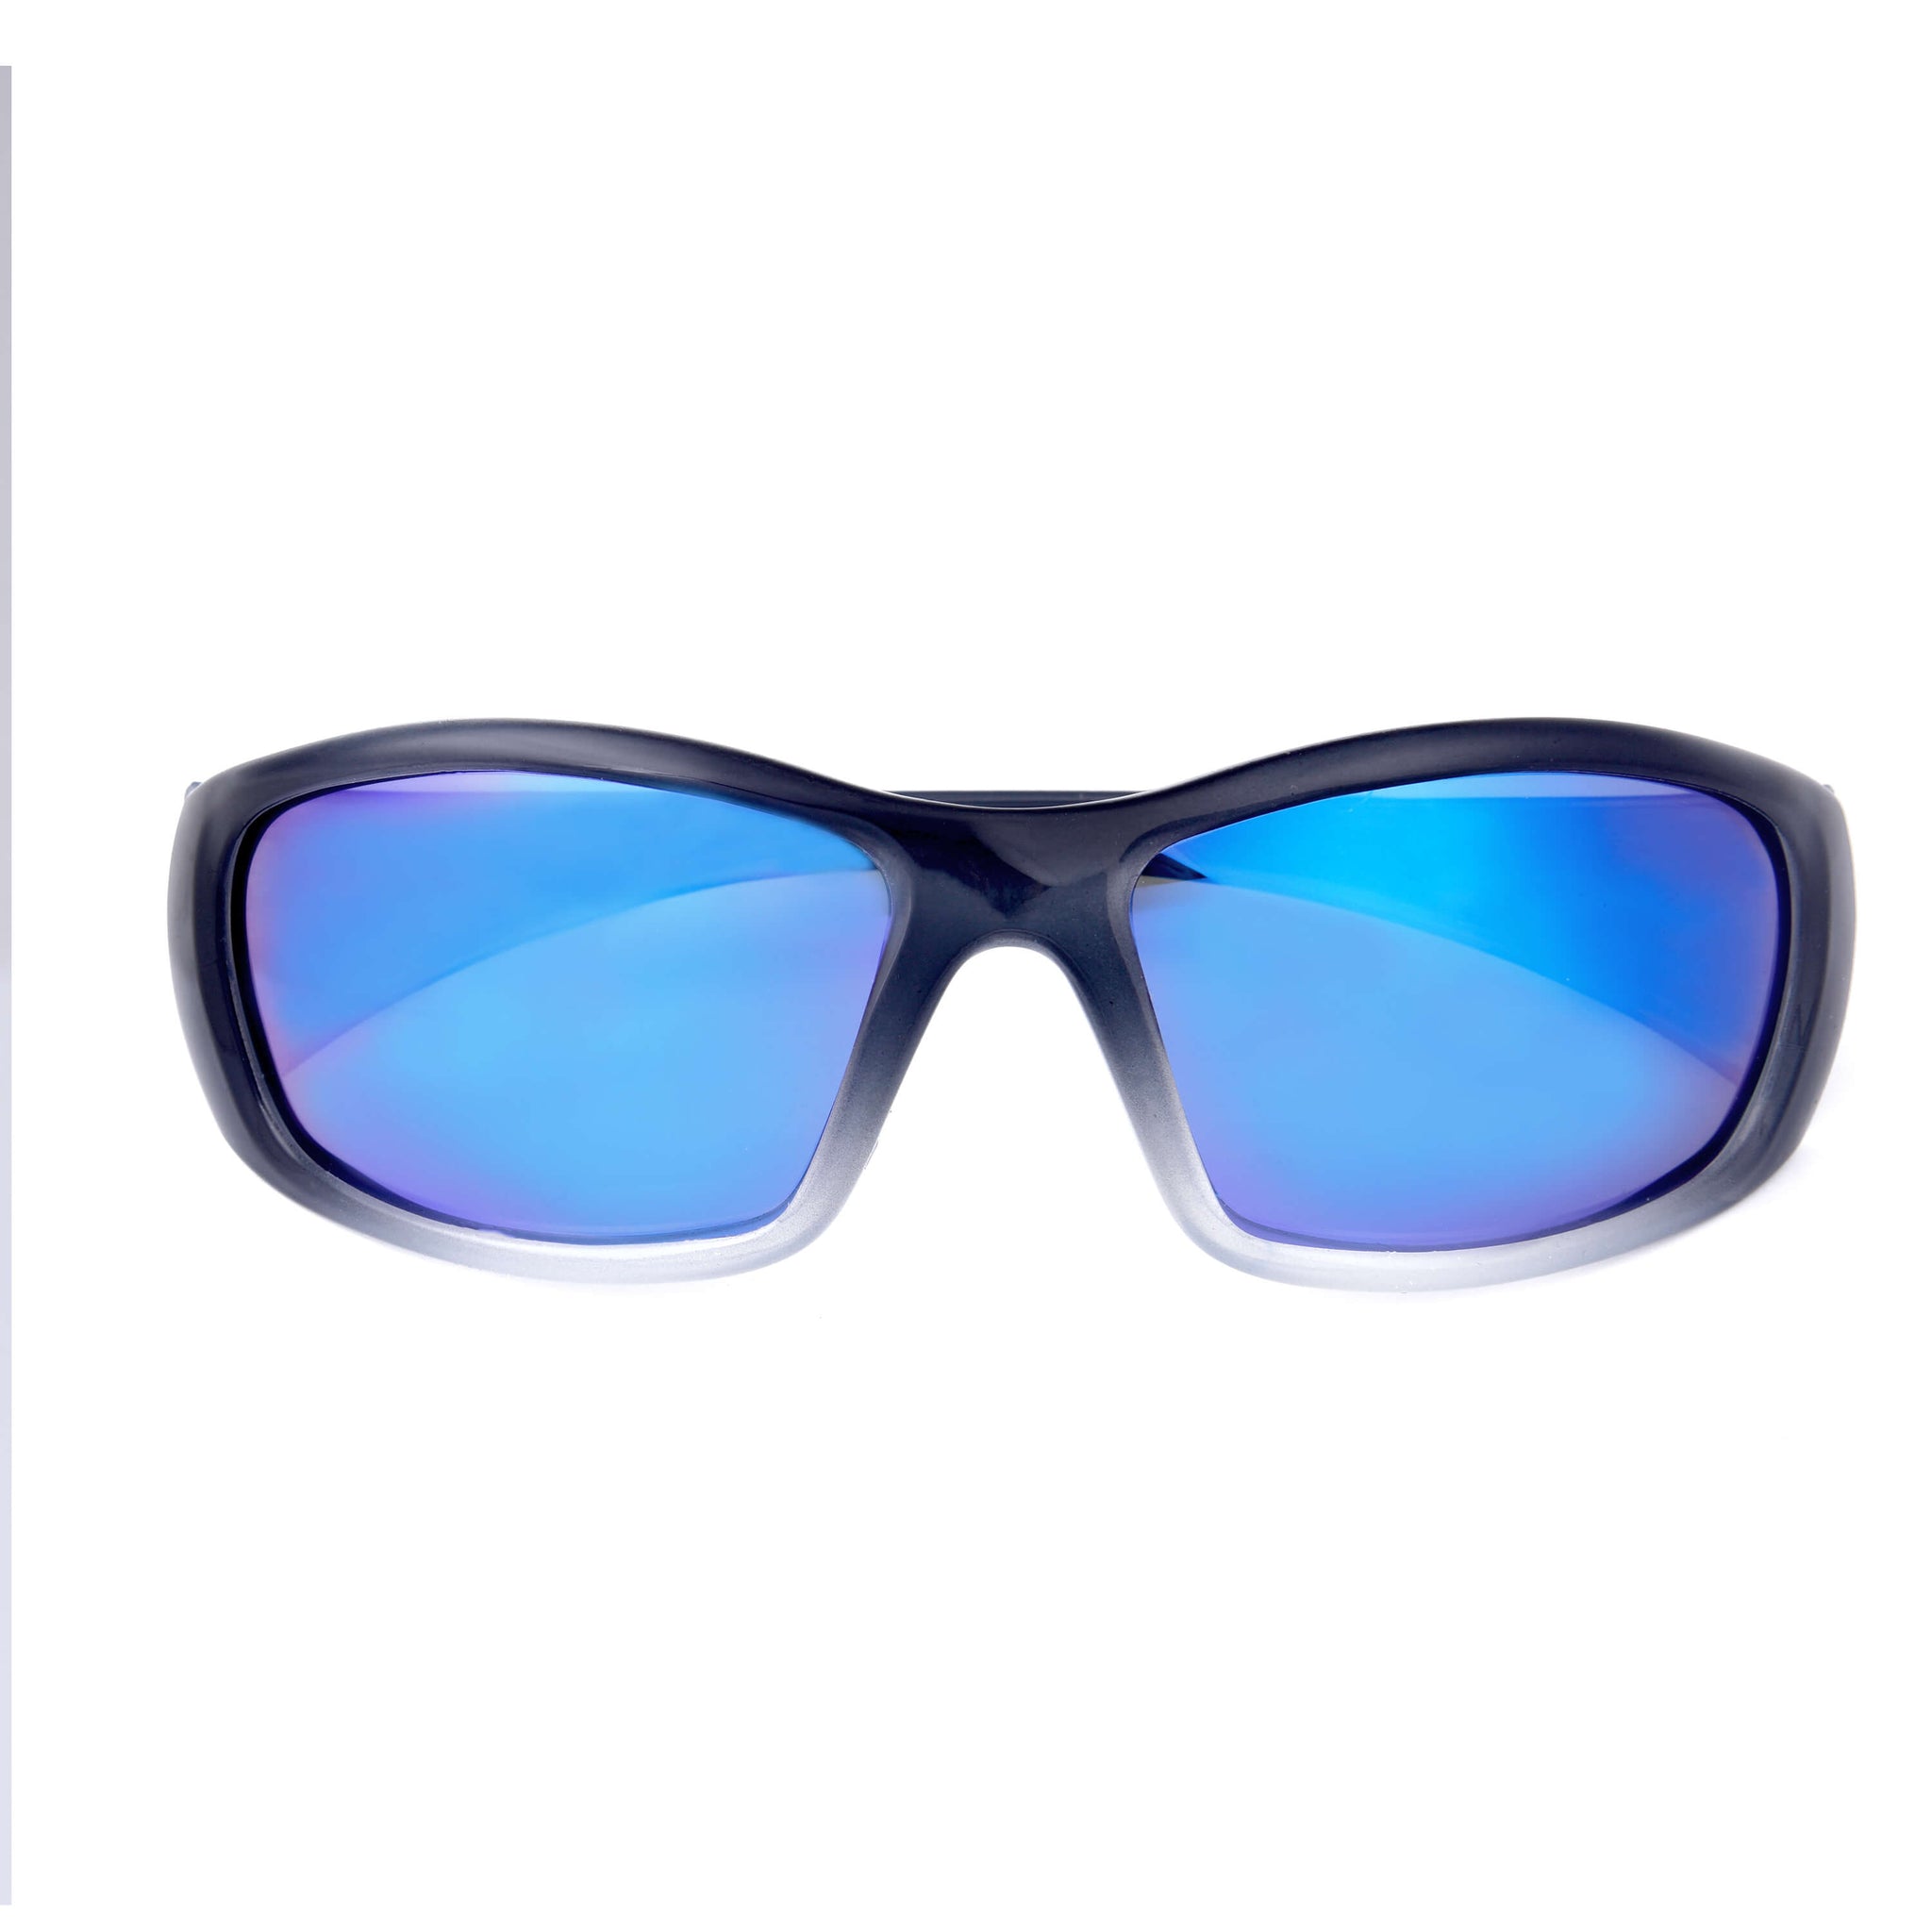 Floating Sunglasses- Polarized Lense and Floats on the Water! - Hornet Watersports